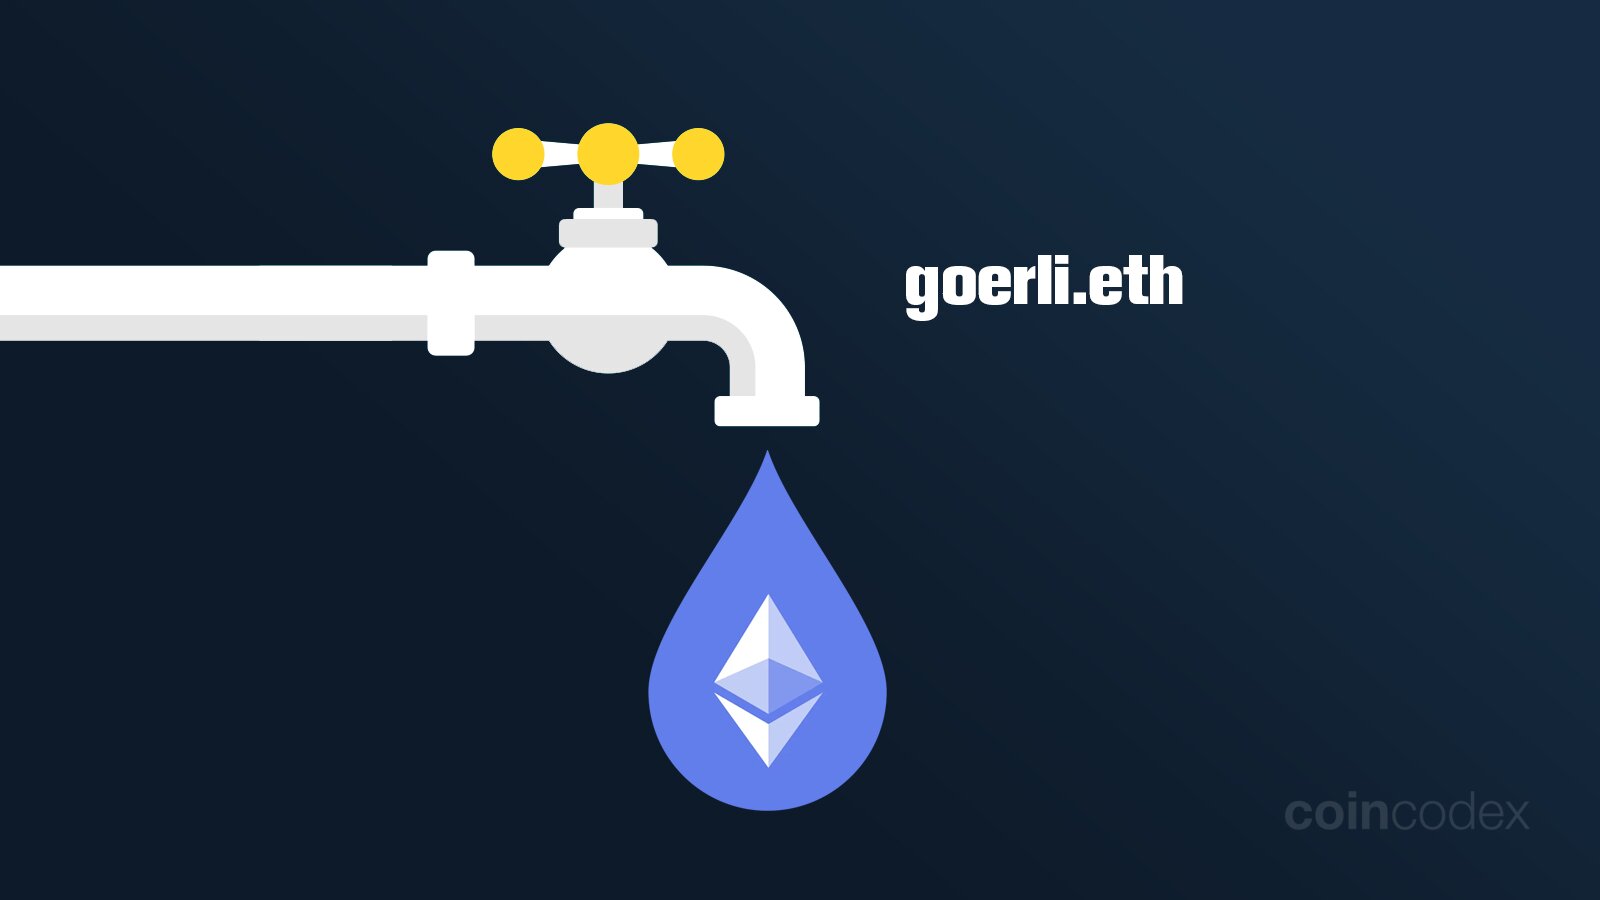 Free Goerli - Get Goerli Faucet Funds Without Having to Pay